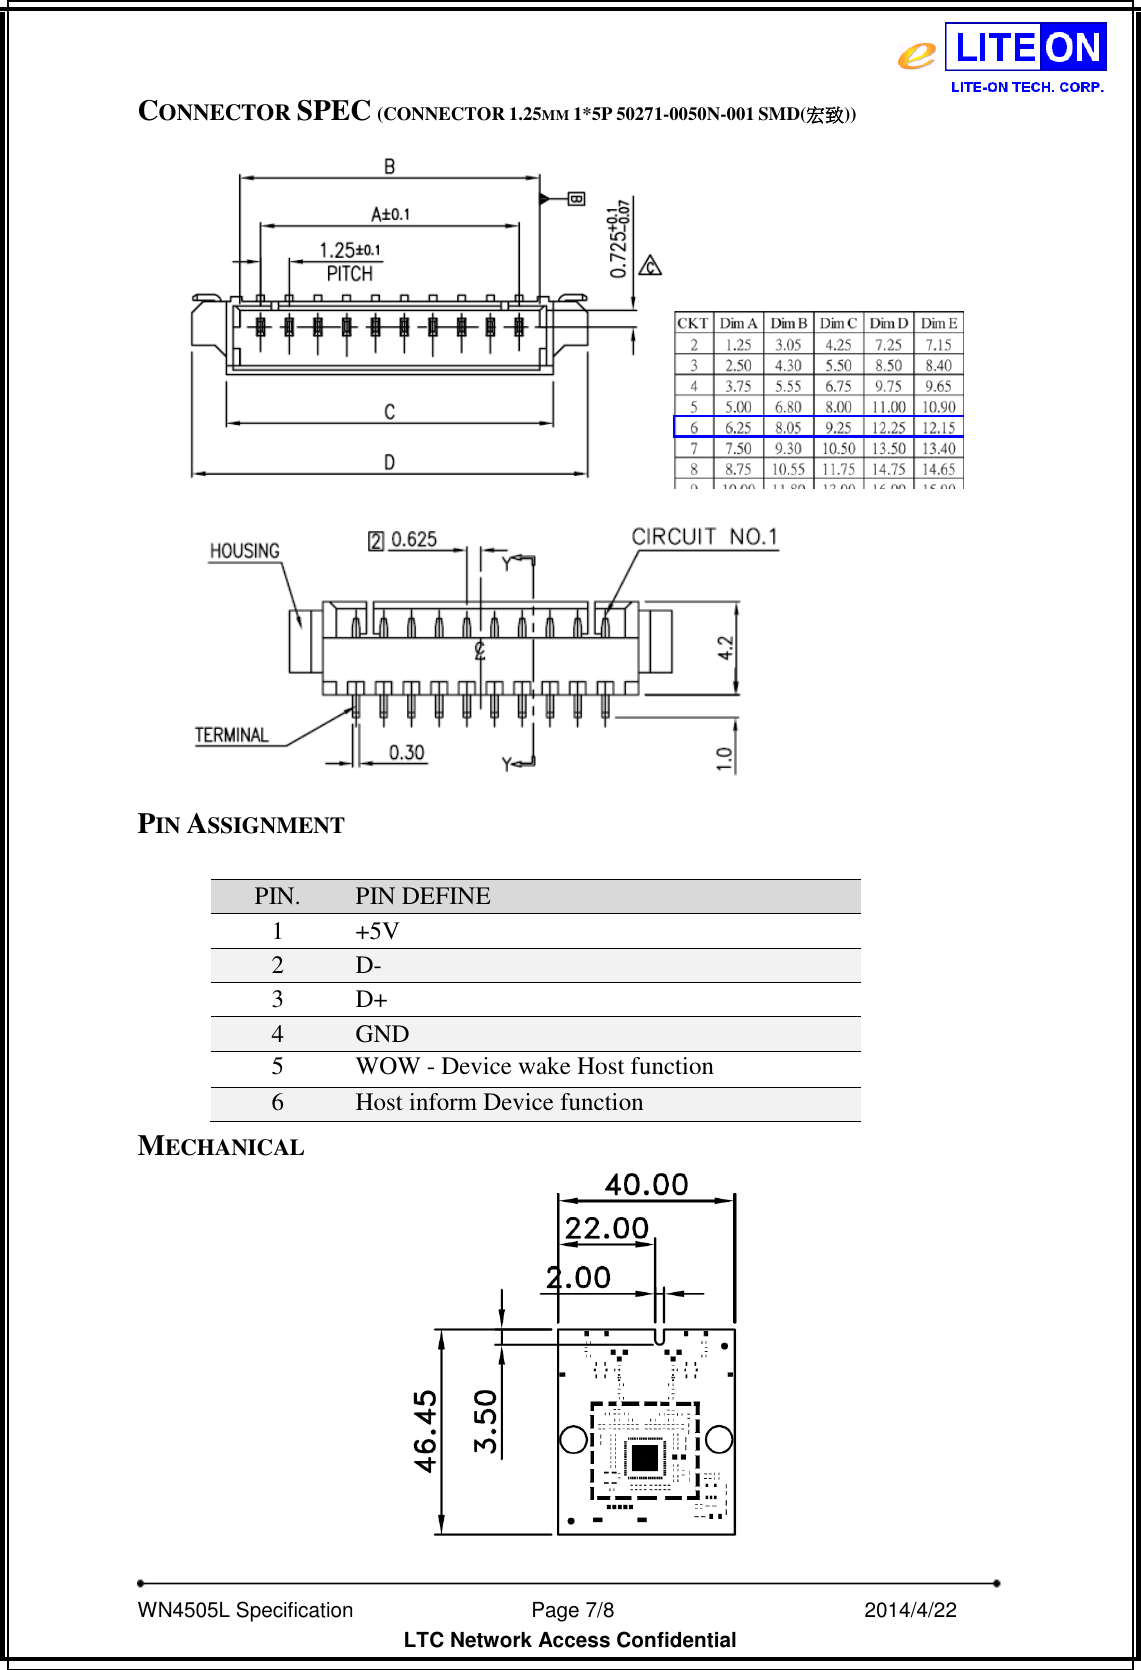   WN4505L Specification                              Page 7/8                                                2014/4/22   LTC Network Access Confidential CONNECTOR SPEC (CONNECTOR 1.25MM 1*5P 50271-0050N-001 SMD(宏致))  PIN ASSIGNMENT  PIN. PIN DEFINE 1 +5V 2 D- 3 D+ 4 GND 5 WOW - Device wake Host function   6 Host inform Device function   MECHANICAL  